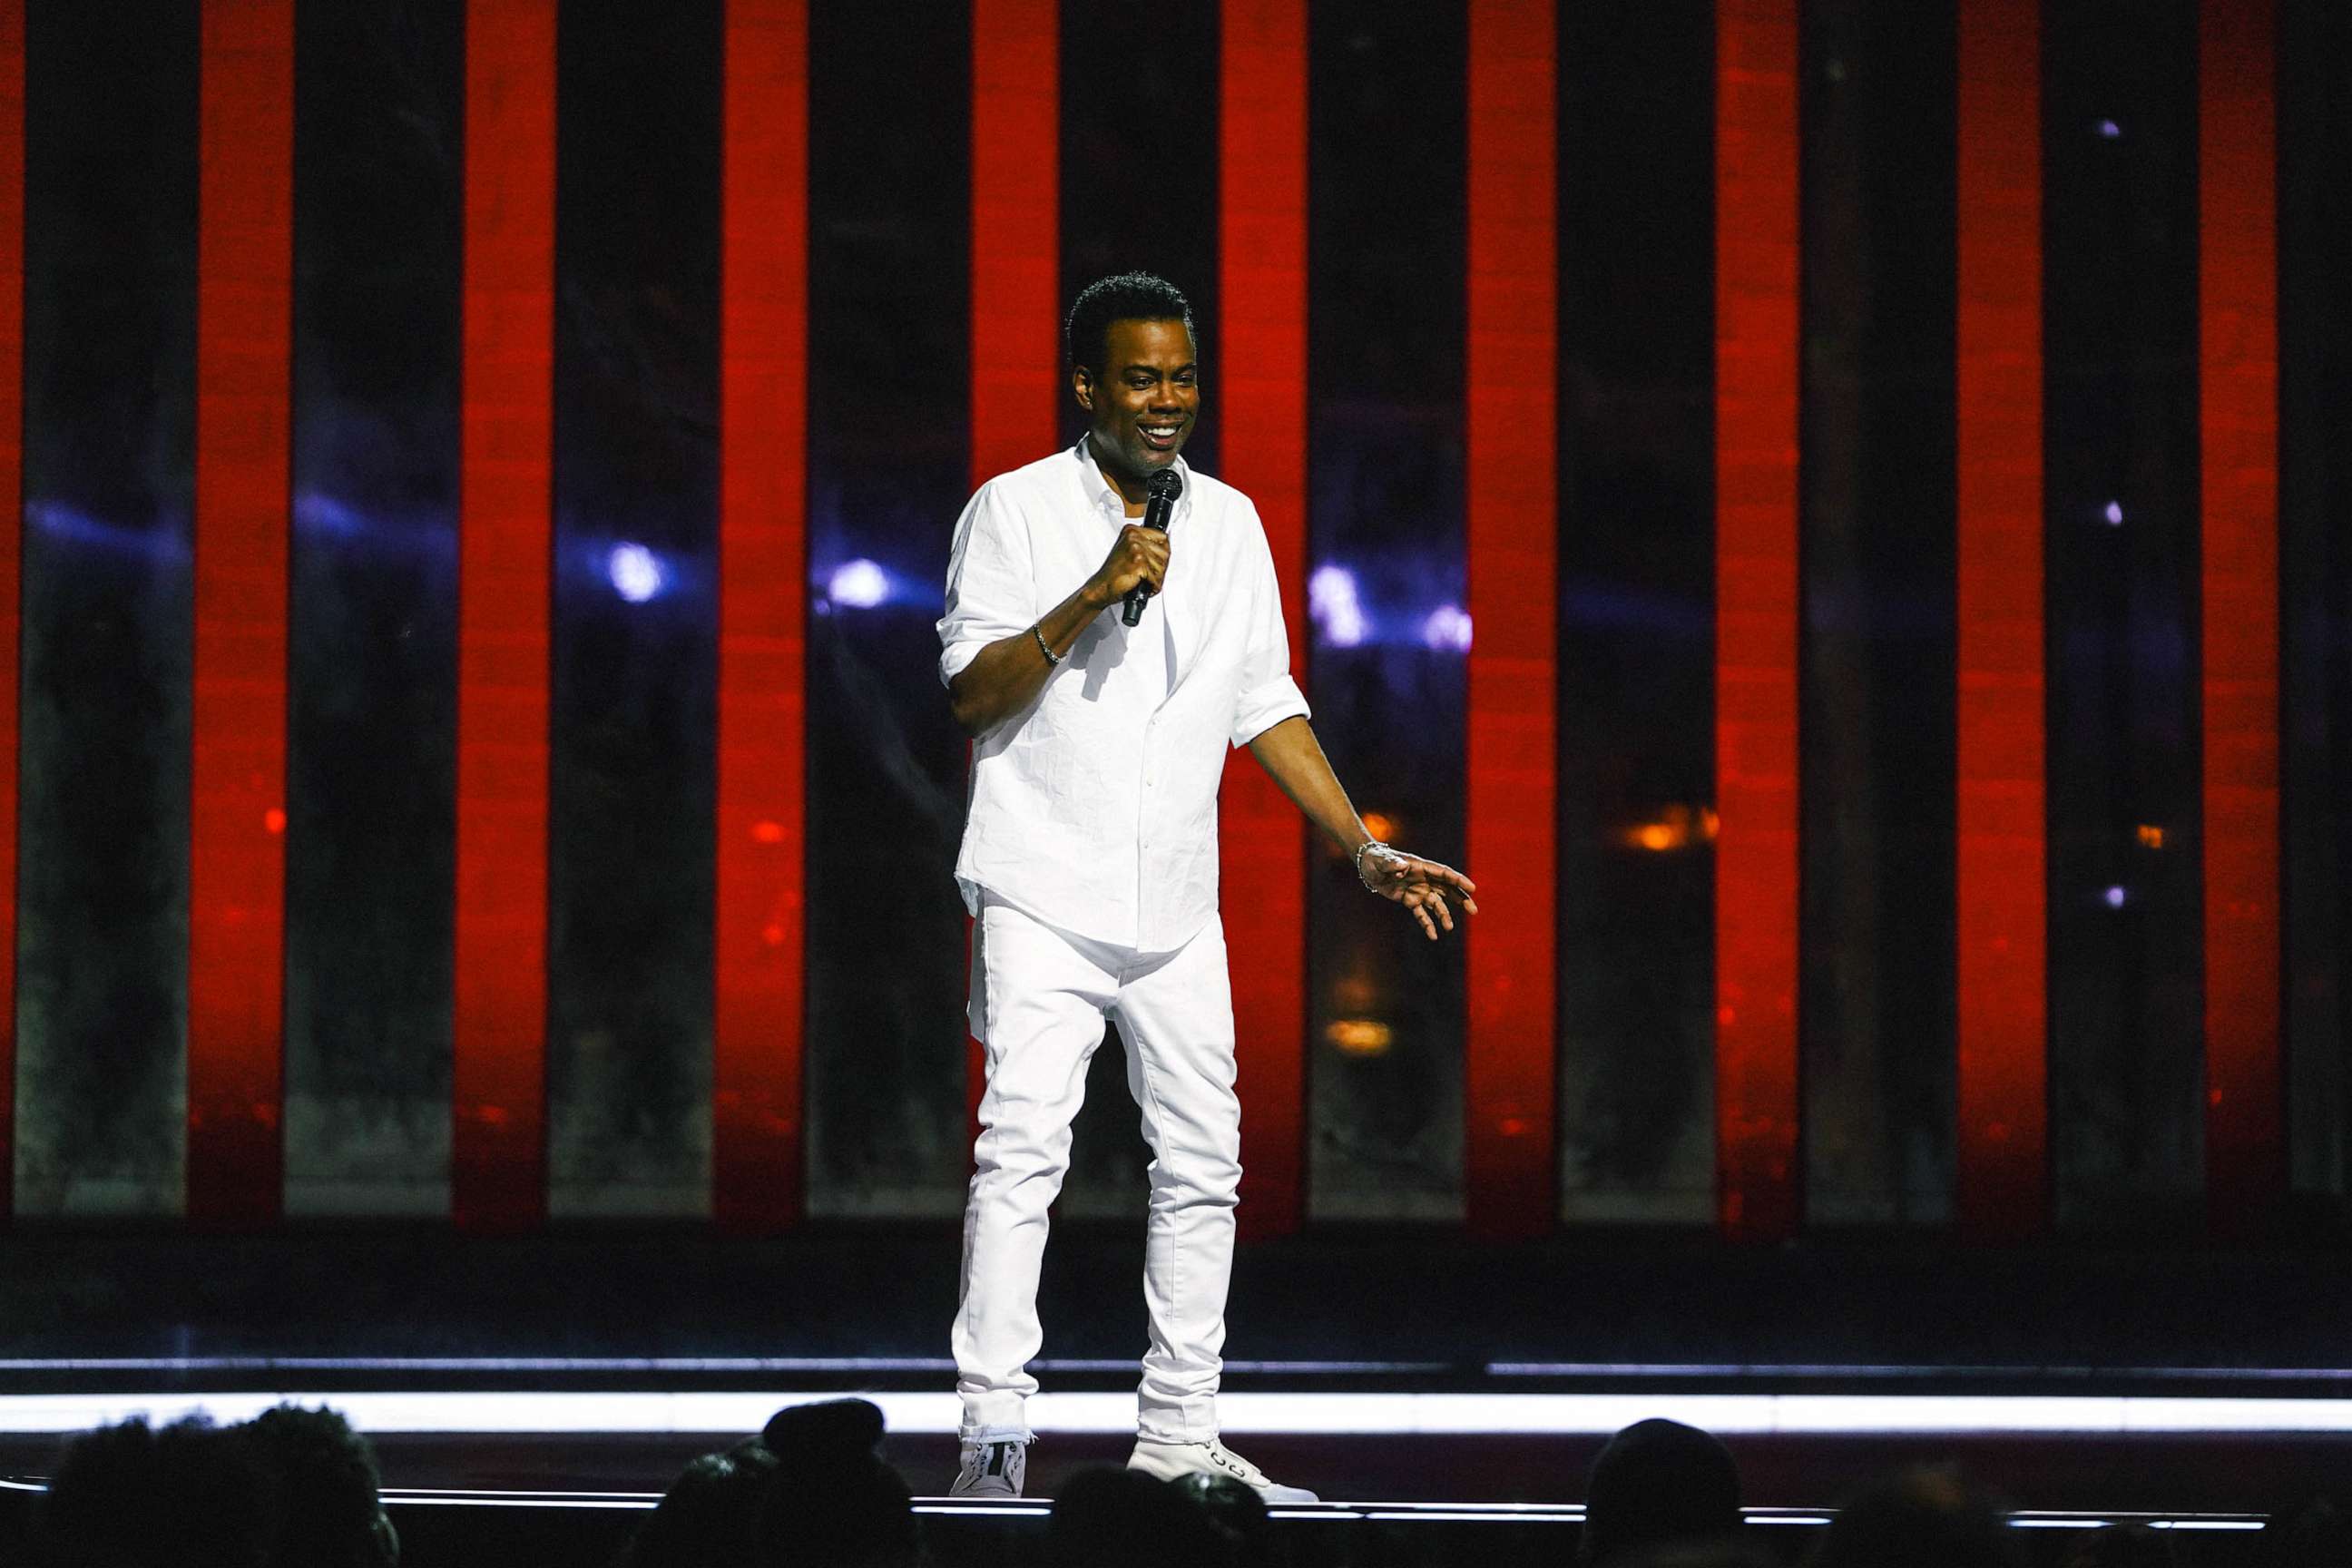 PHOTO: Chris Rock at the Hippodrome Theater in Baltimore.